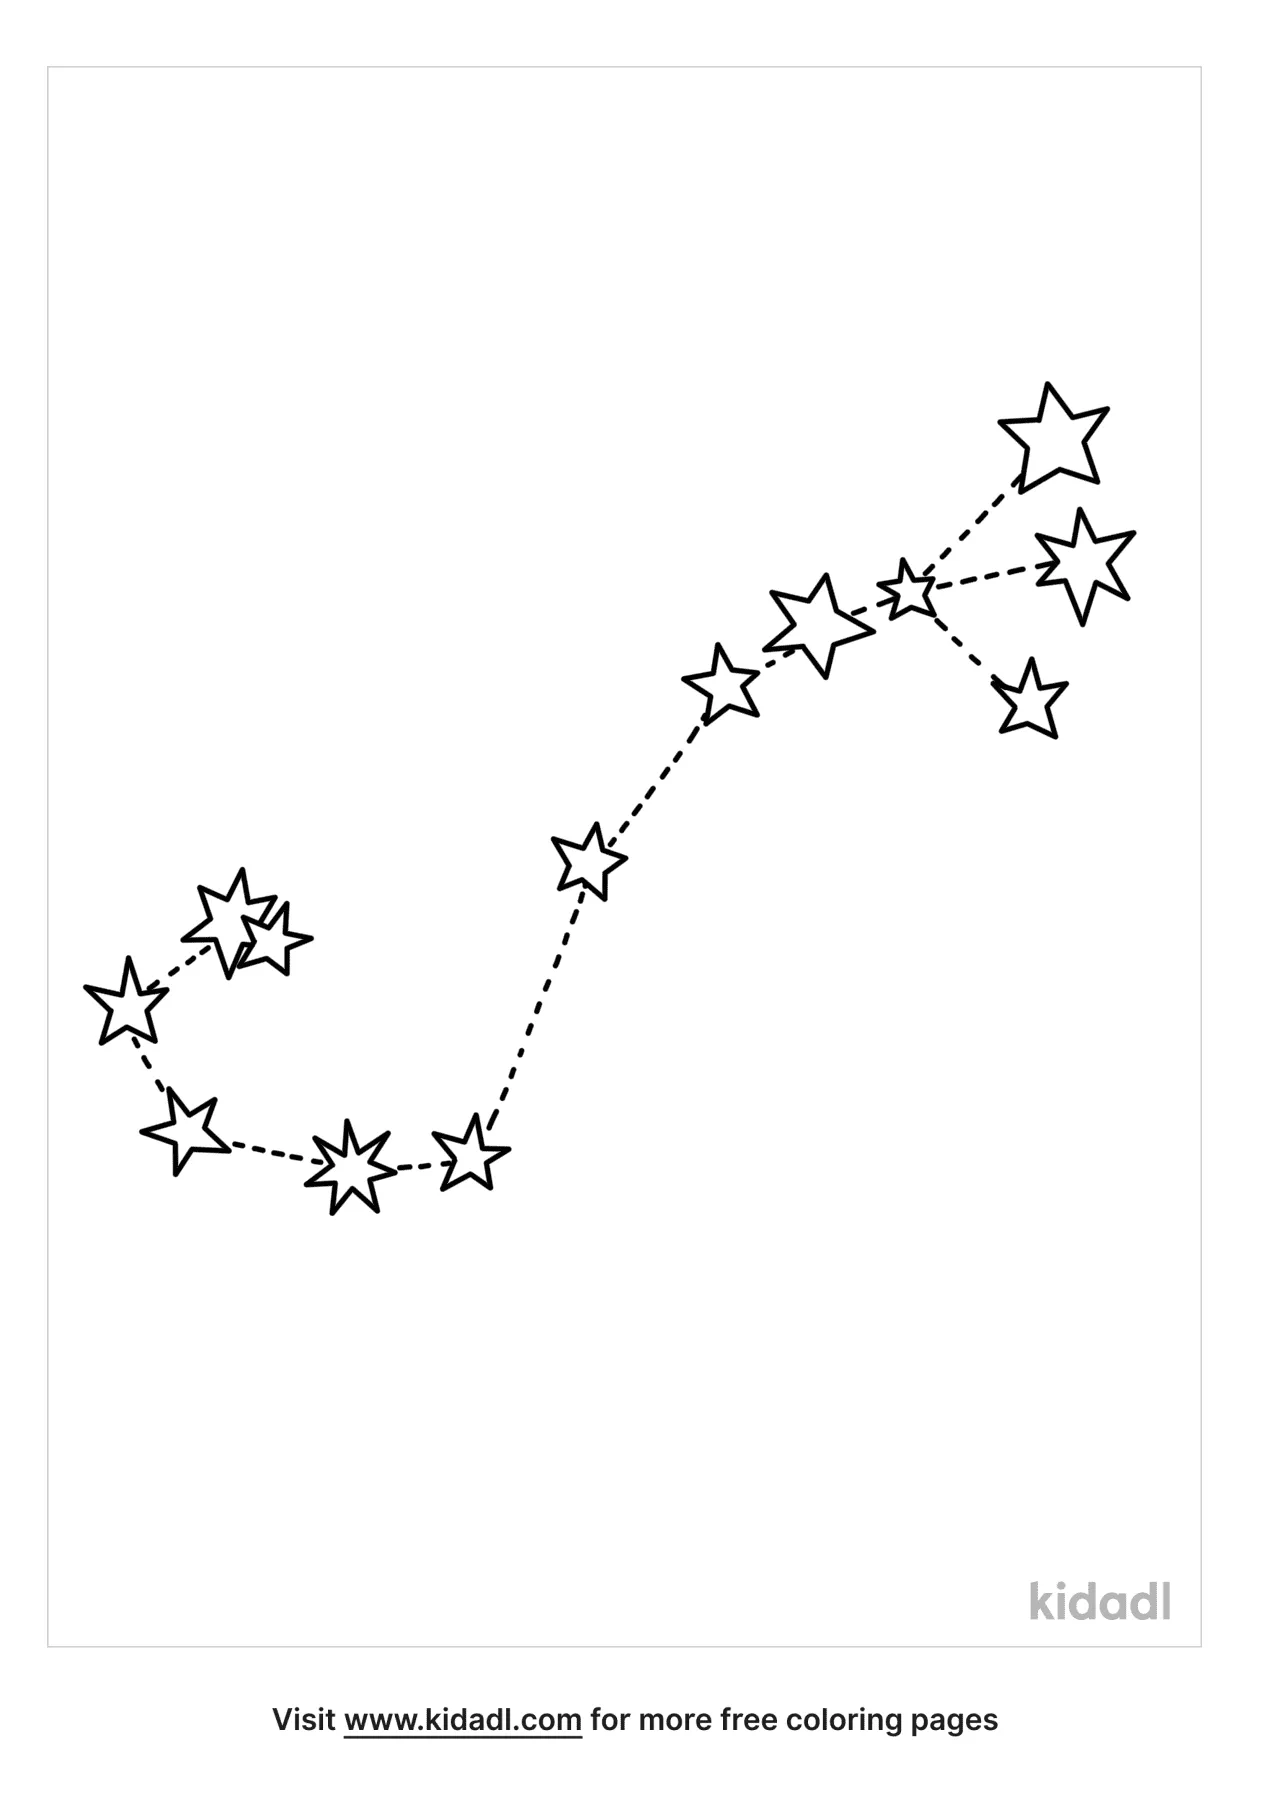 Free Scorpius Constellation Coloring Page | Coloring Page Printables ...